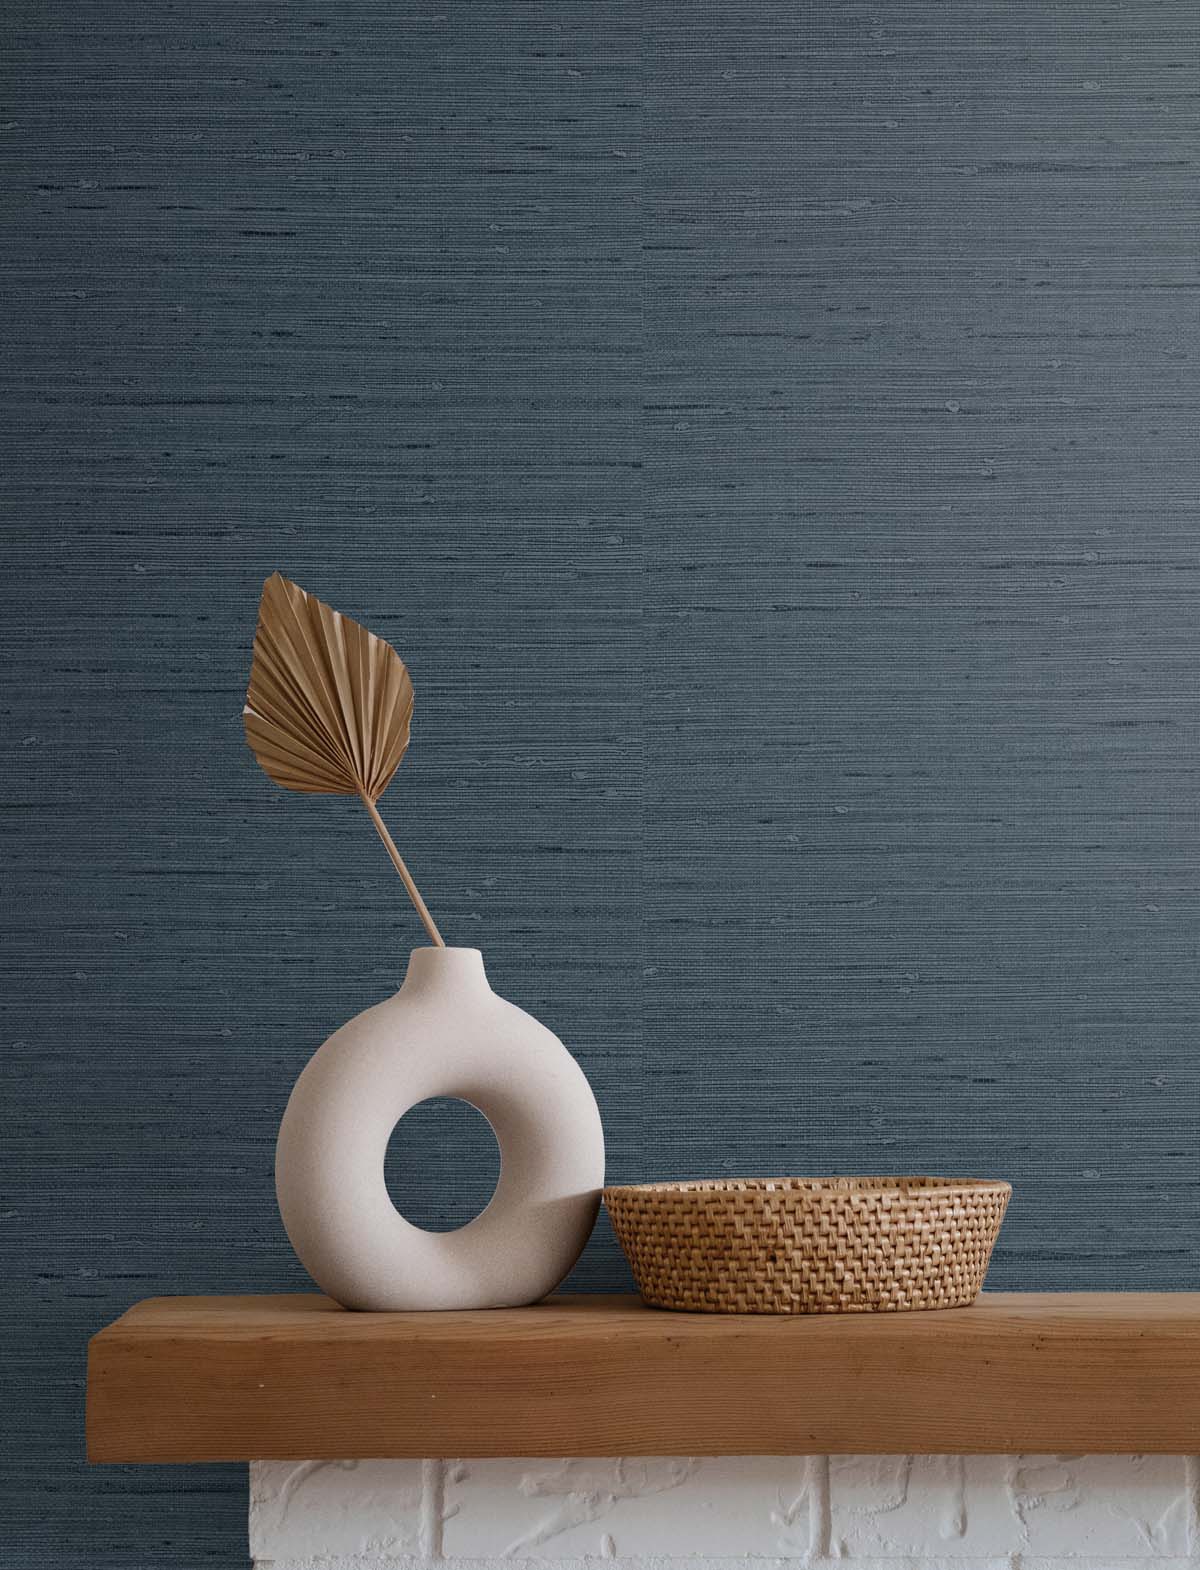 dark blue faux grasscloth wallpaper with a white stone vase, single golden leaf next to an empty wicker basket atop a wooden and white stone fireplace